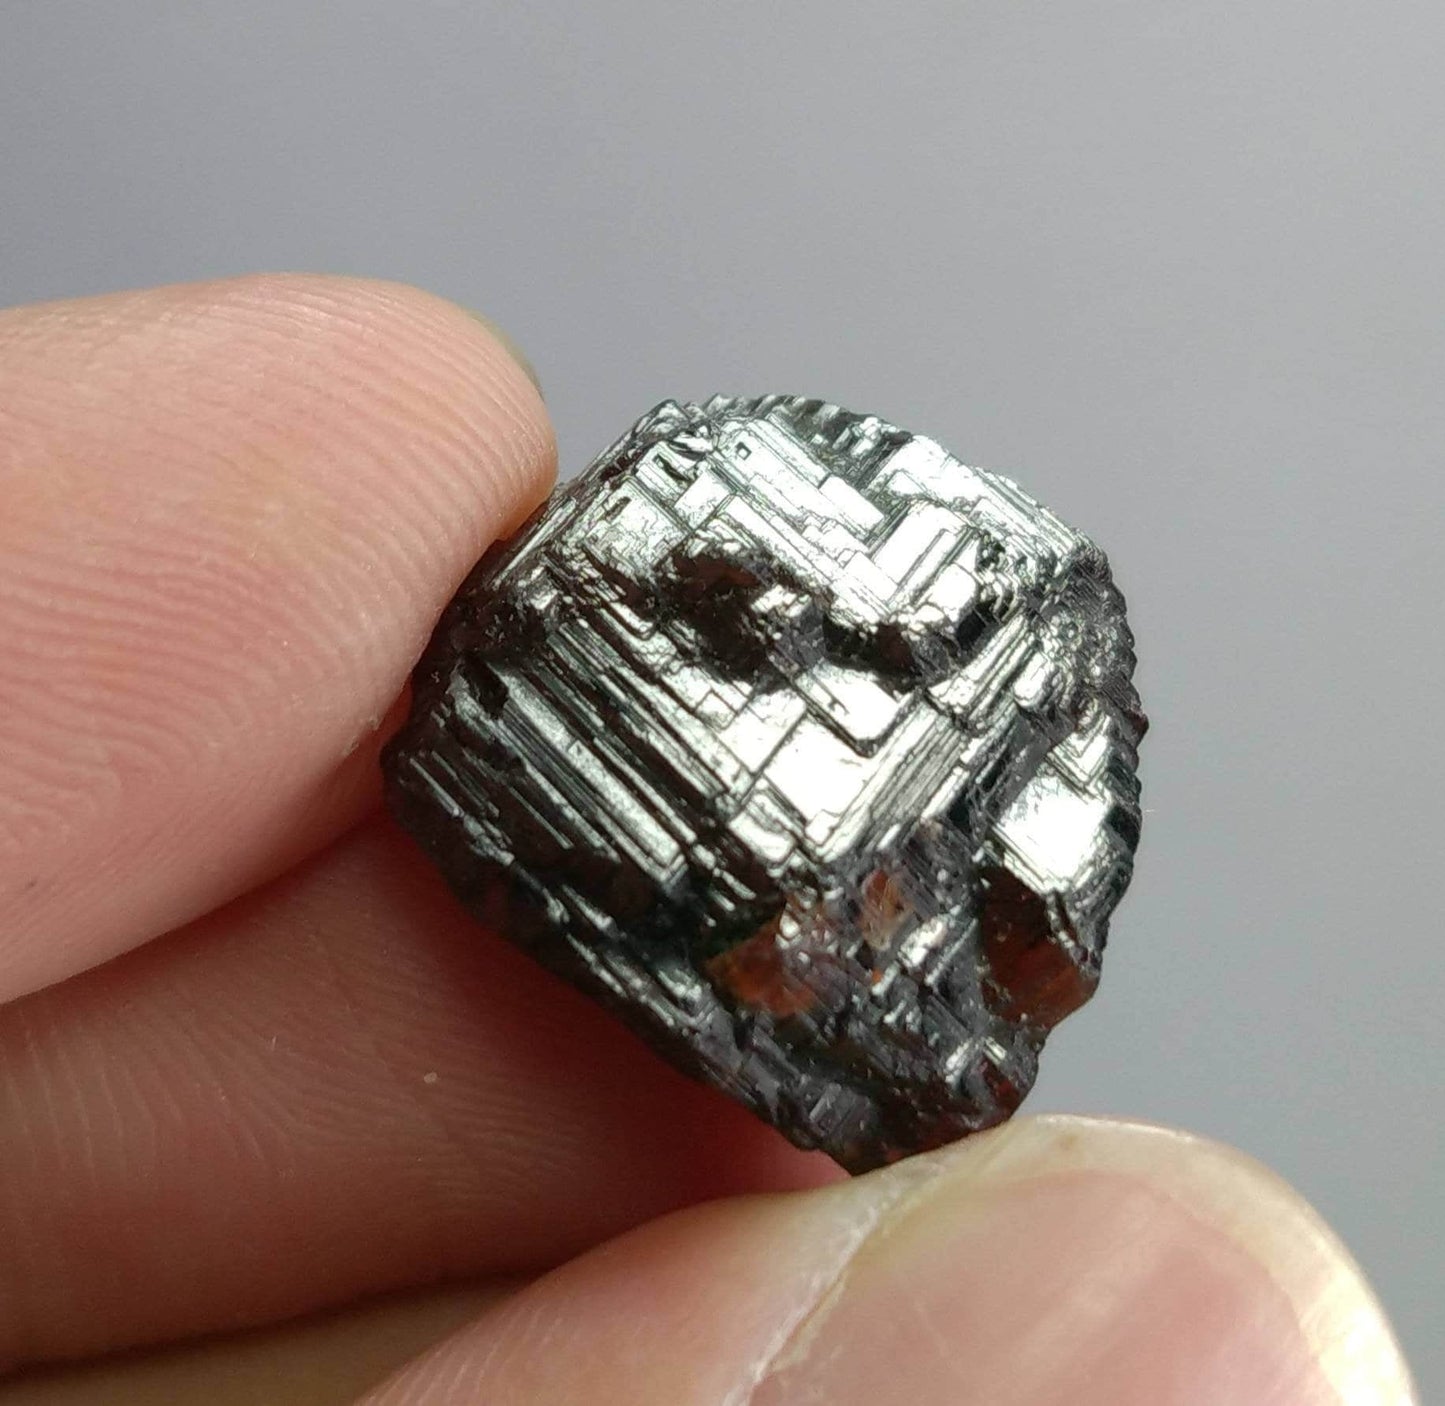 ARSAA GEMS AND MINERALSNatural top quality Beautiful 5.2 grams Spessartine garnet crystal with wonderful patterns on top of it - Premium  from ARSAA GEMS AND MINERALS - Just $25.00! Shop now at ARSAA GEMS AND MINERALS